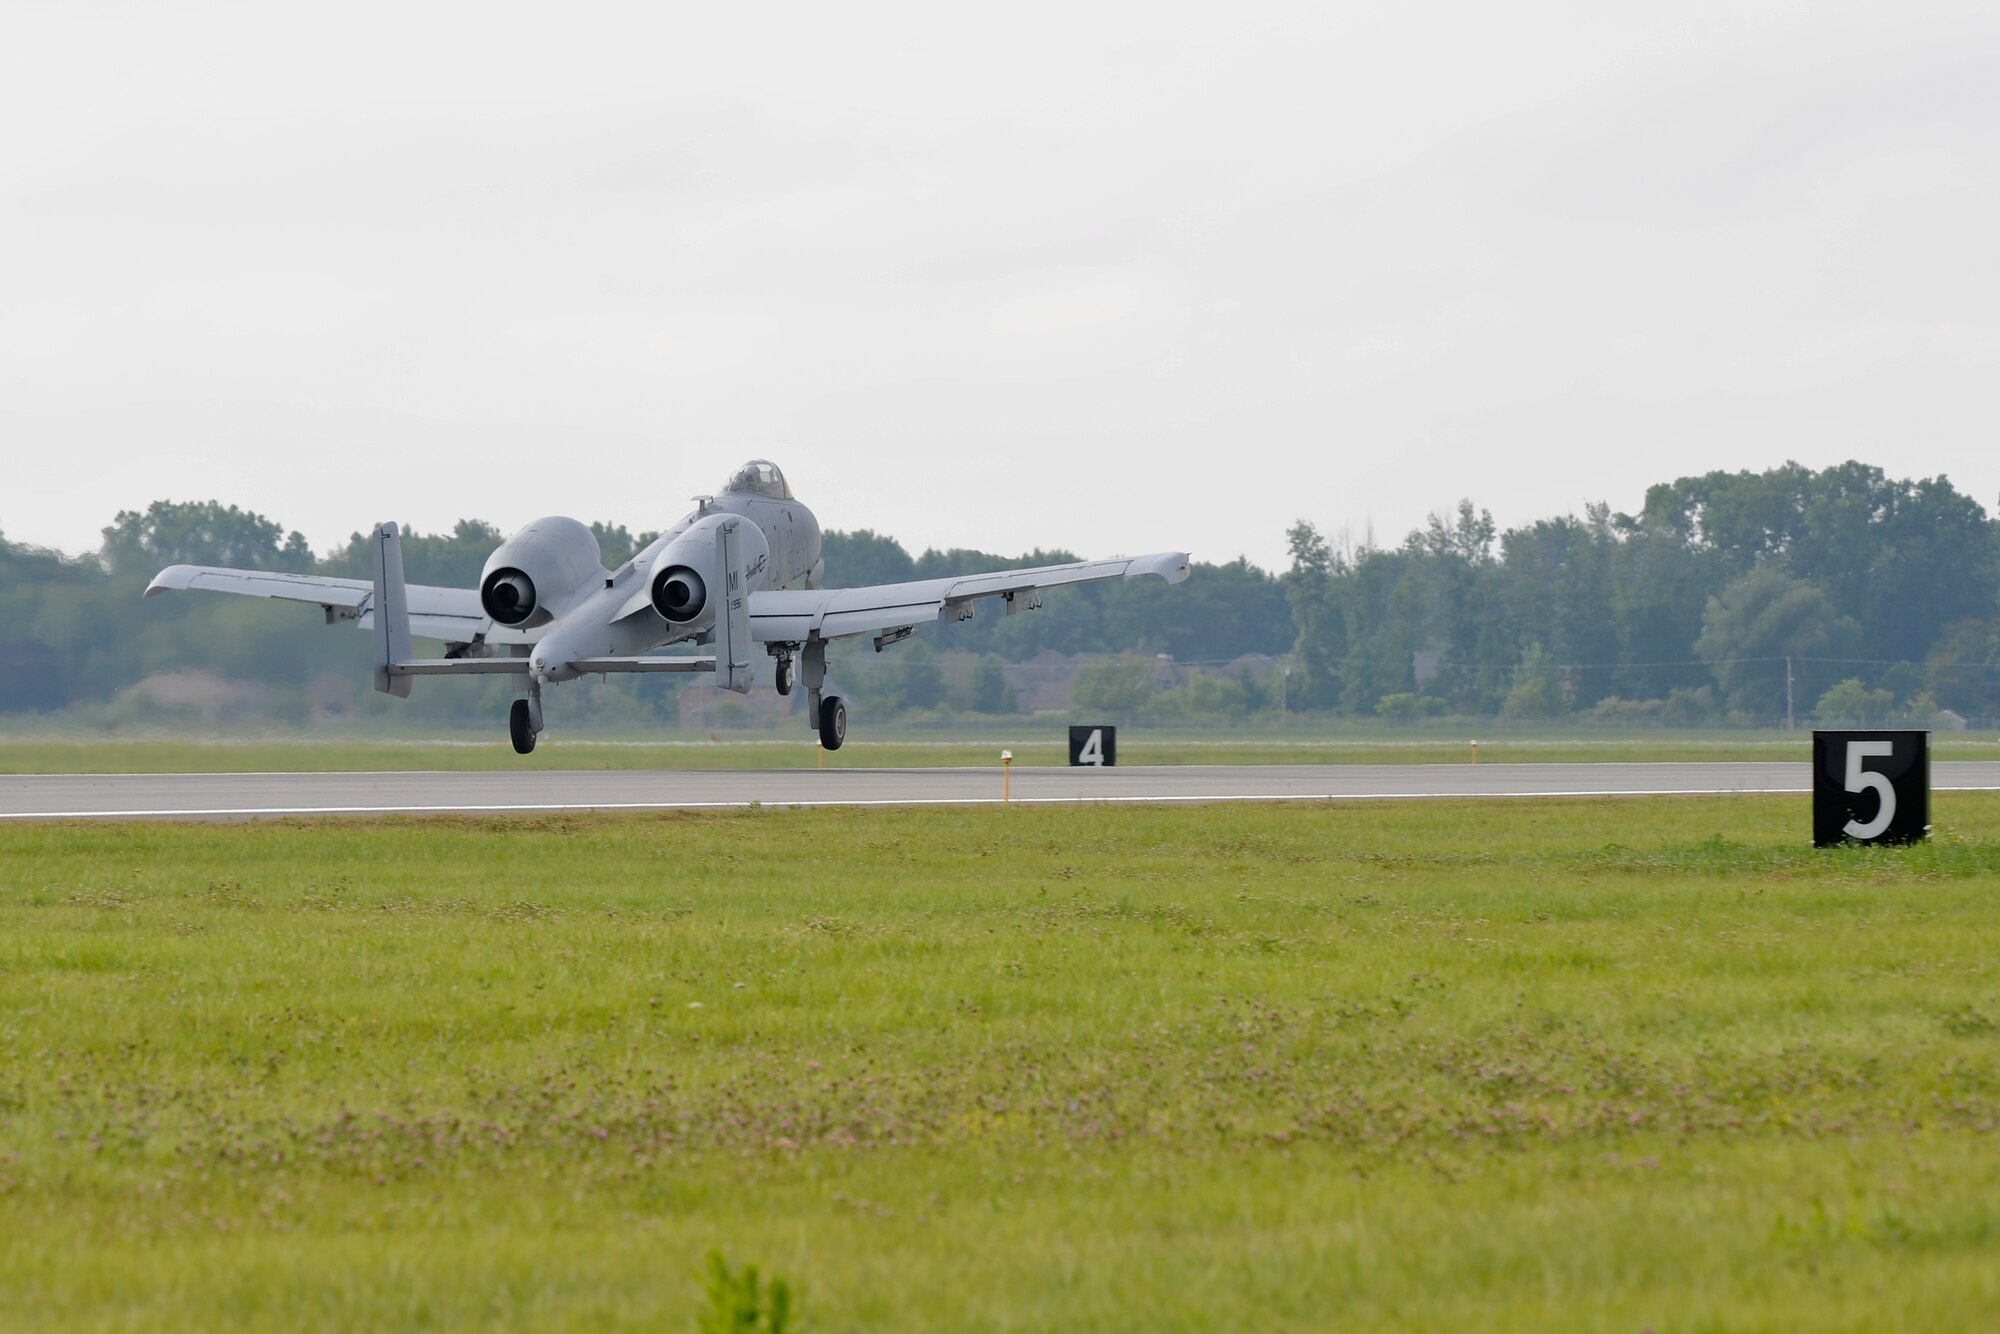 The 127th Wing prepares to launch A-10 Thunderbolt II aircraft from Selfridge Air National Guard Base, Mich., to participate in Operation Northern Strike 2014.  
Operation Northern Strike demonstrates the Army and Air National Guard’s ability to plan and conduct complex, joint operations.  Air and ground forces will work together in real time to provide an unprecedented mix of forces and weaponry regardless of service or country. Twenty-four units from 12 States and two Coalition partners will participate in the three-week event.  Over 300 Total Force fighter, bomber, mobility, and rotary sorties are planned in support of live fire exercises in order to meet stated objectives for participating units.  
(U.S. Air National Guard photo by Terry L. Atwell)